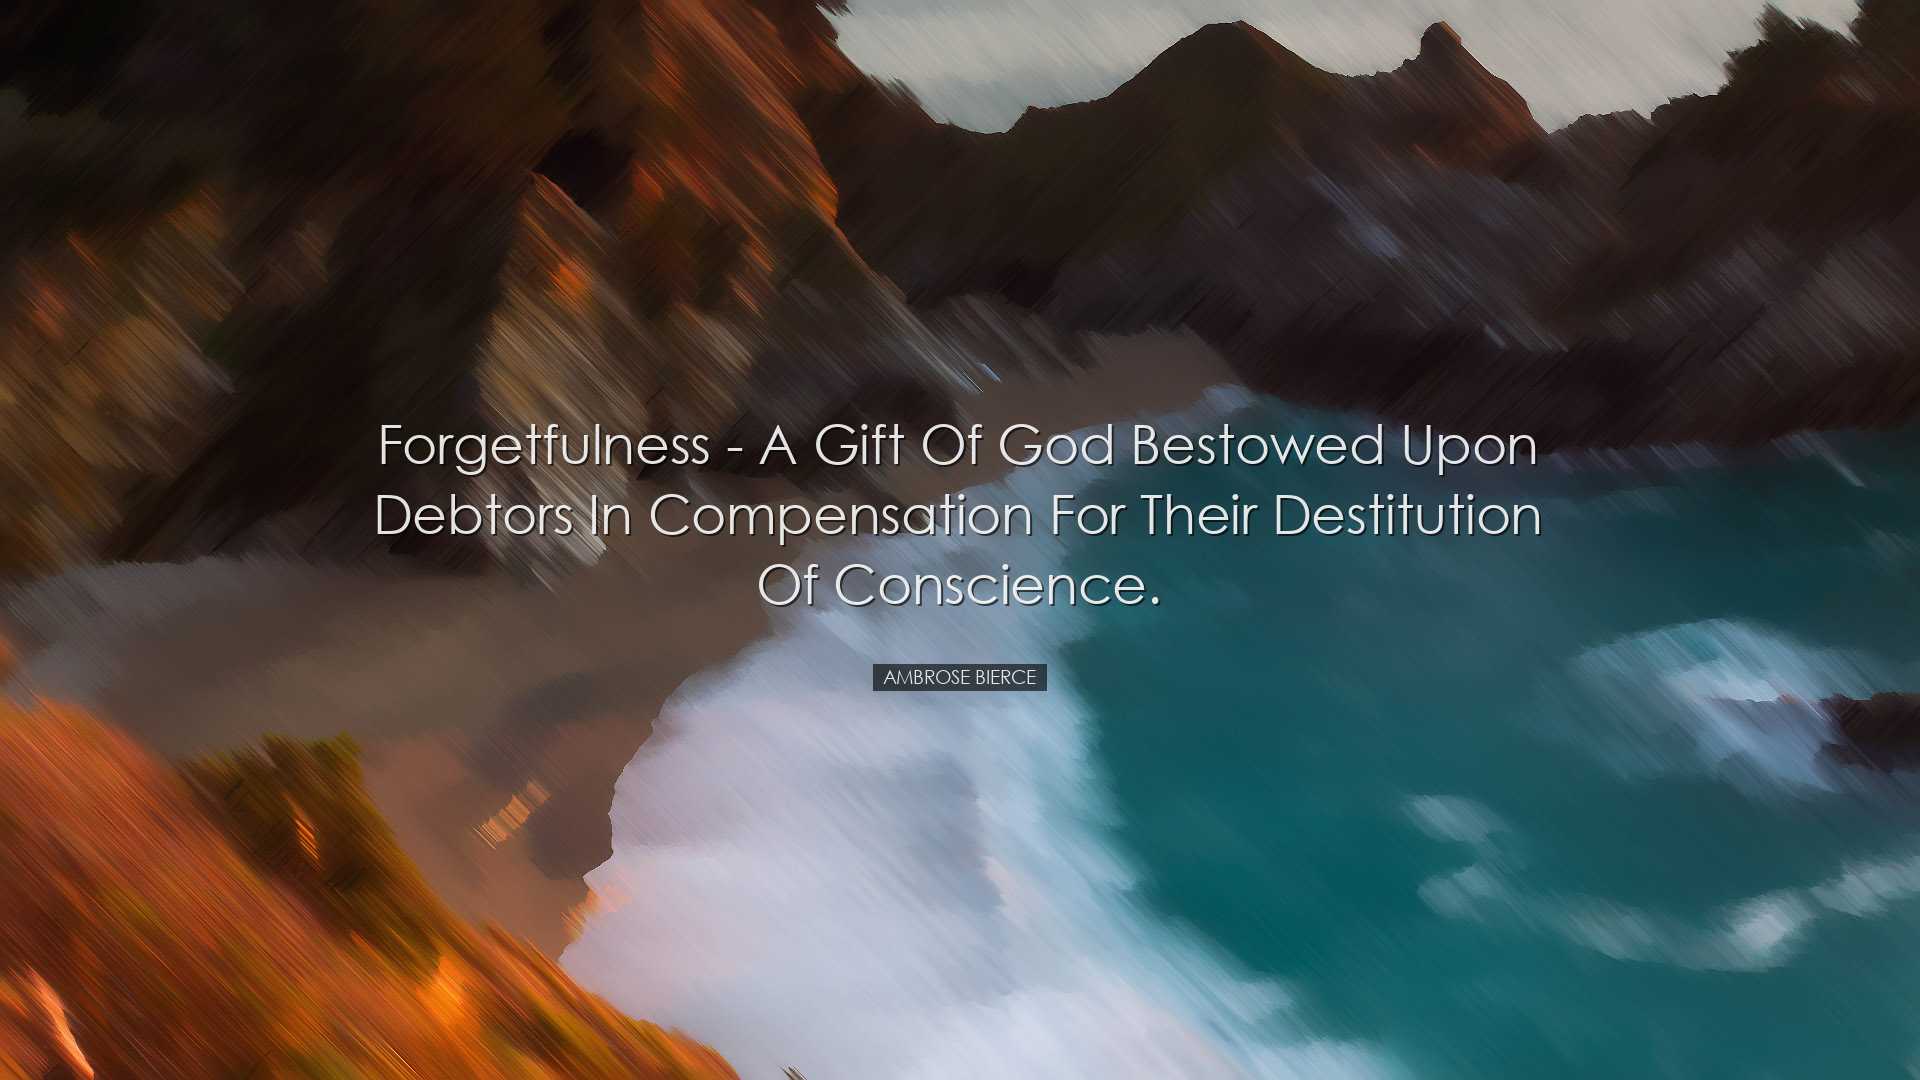 Forgetfulness - a gift of God bestowed upon debtors in compensatio